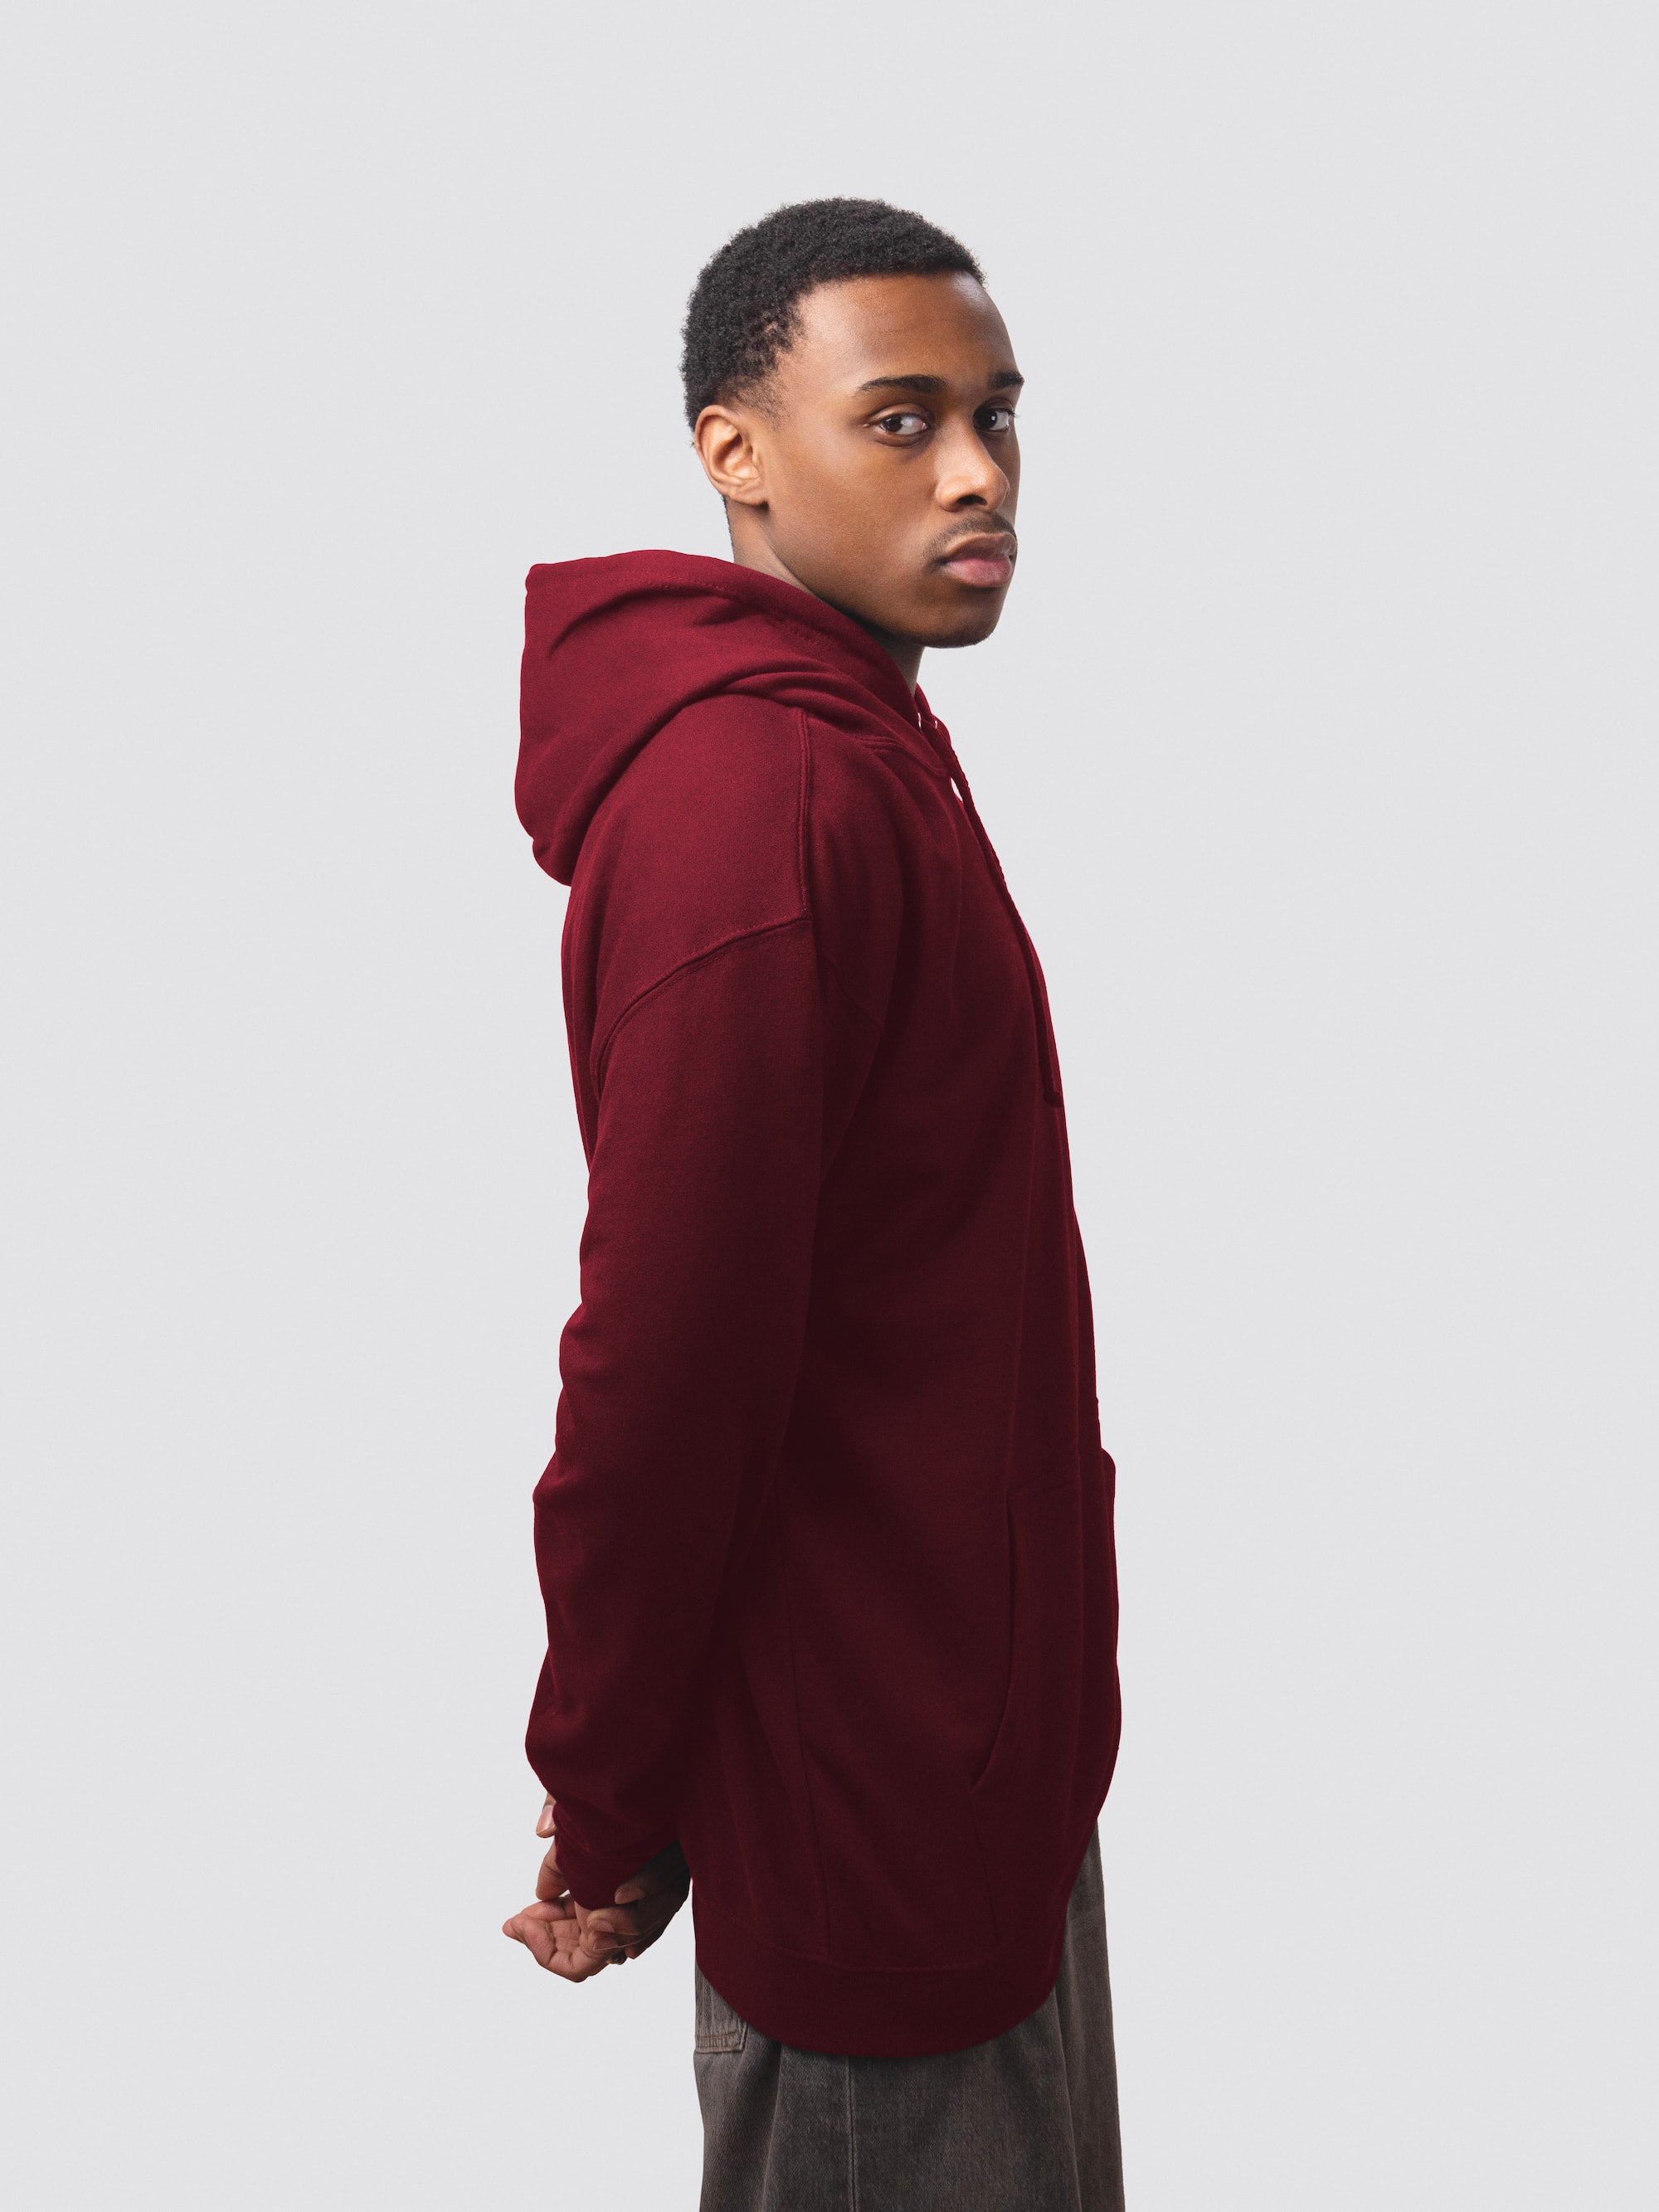 Brasenose College hoodie, made from burgundy cotton-faced fabric